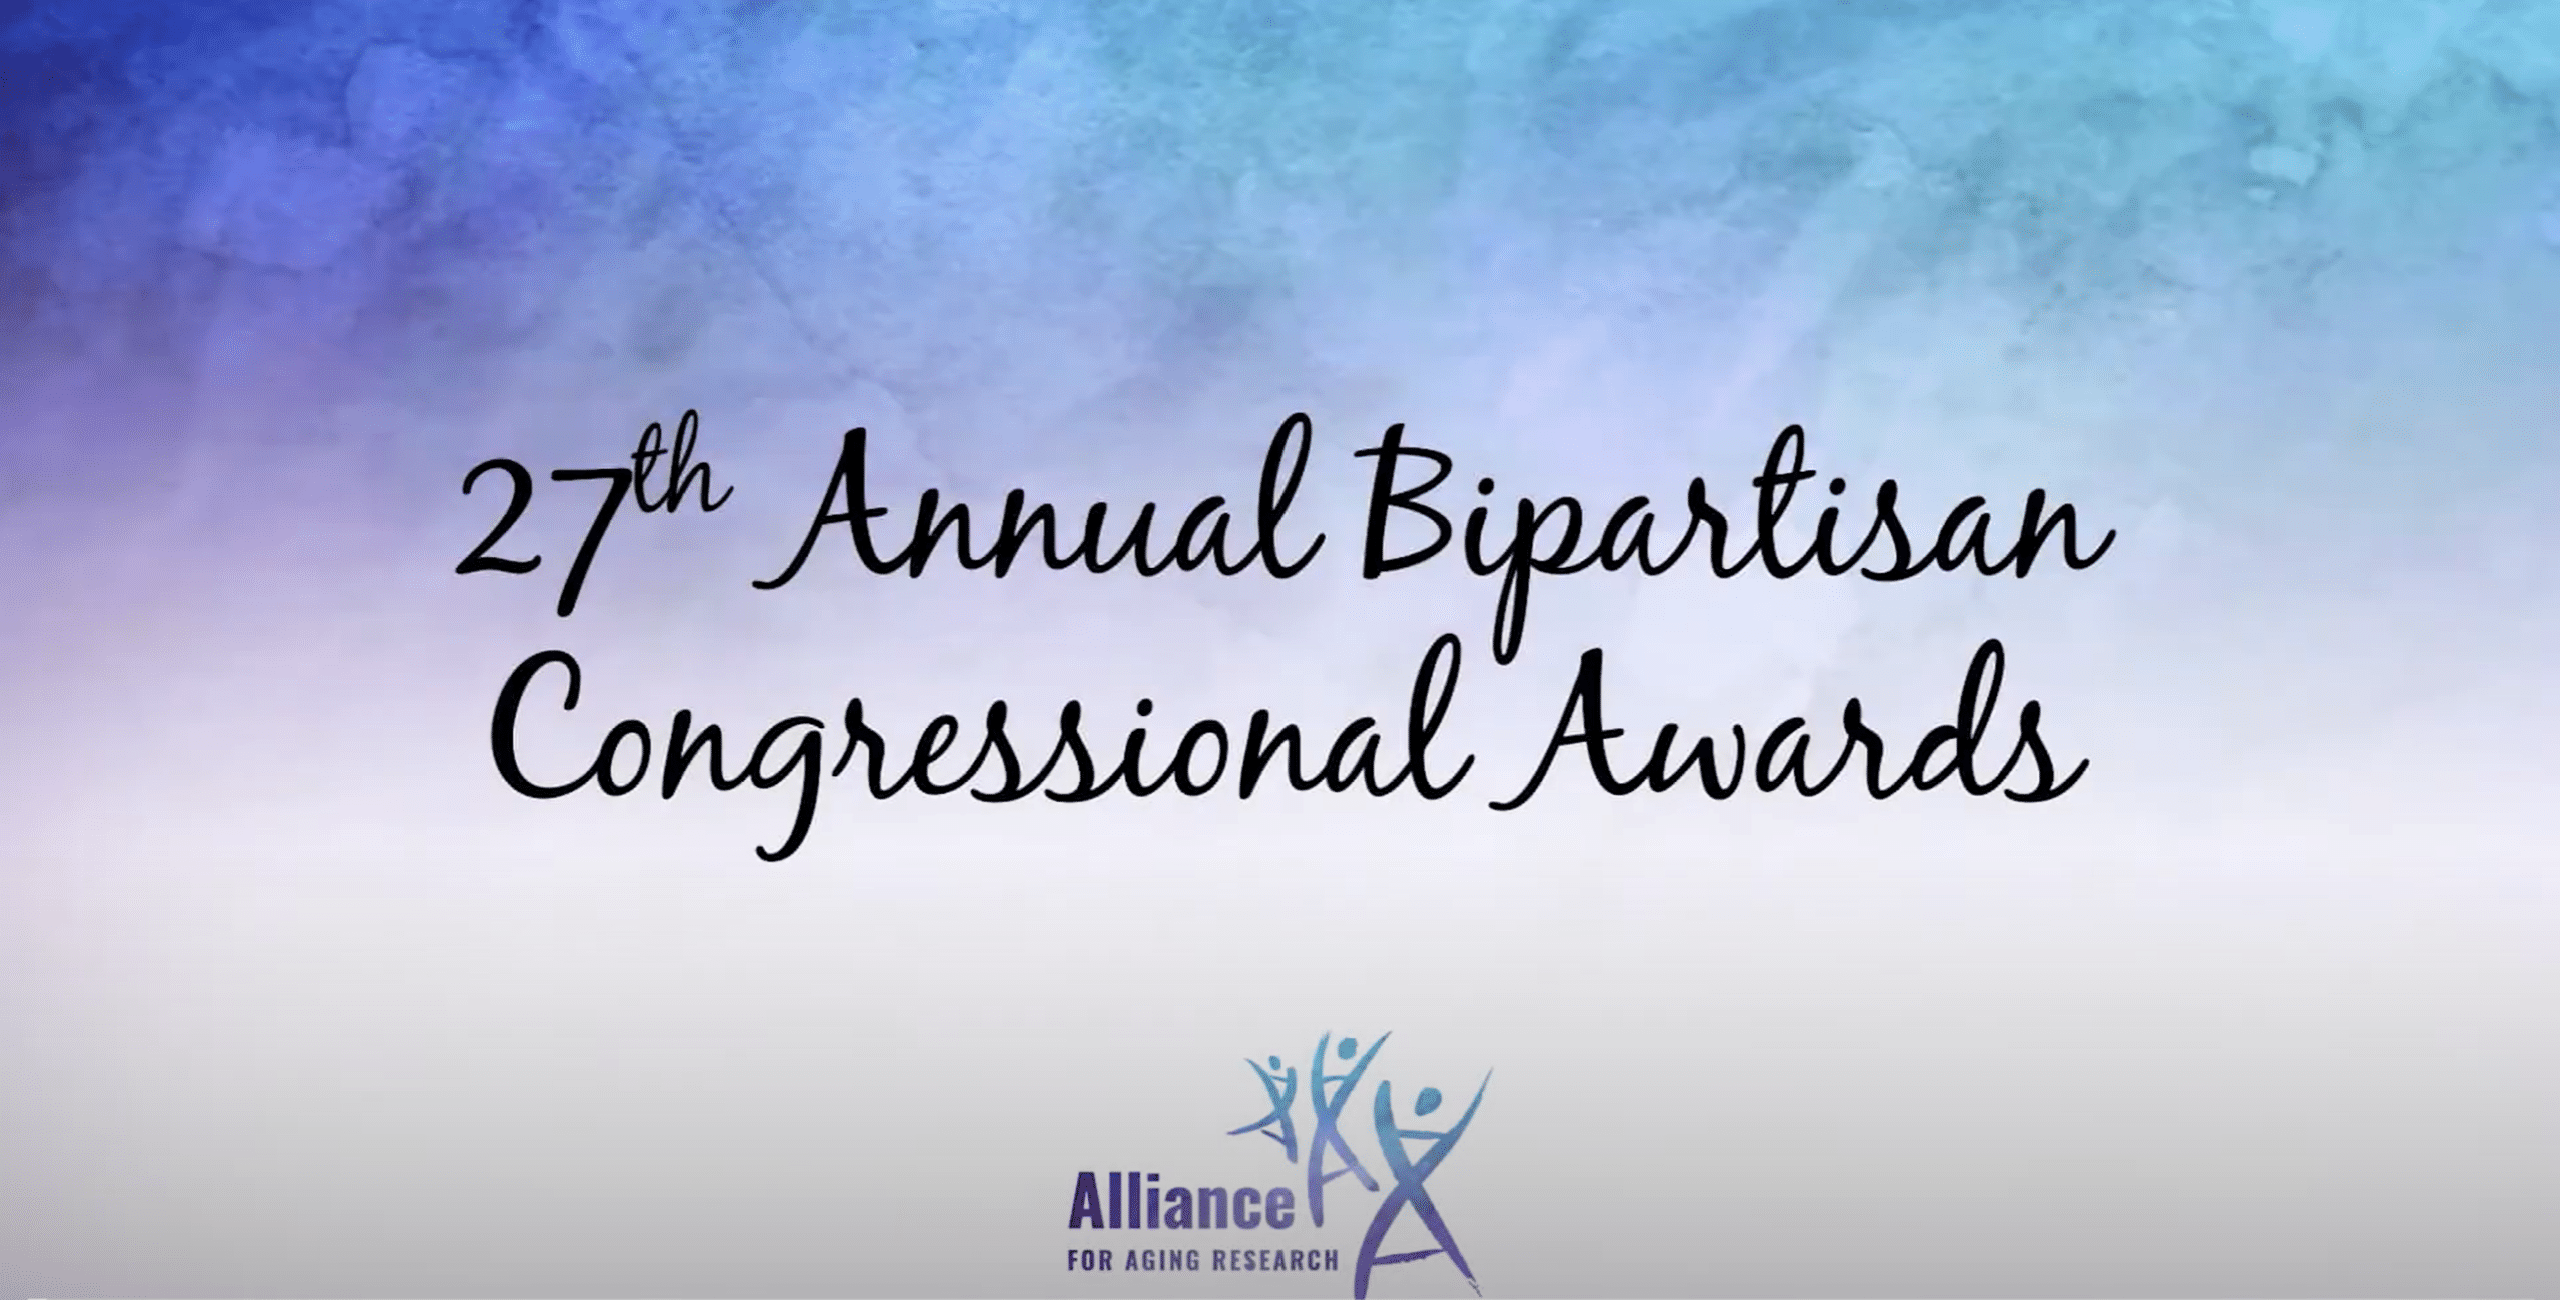 Title slide for 27th Annual Bipartisan Congressional Awards.